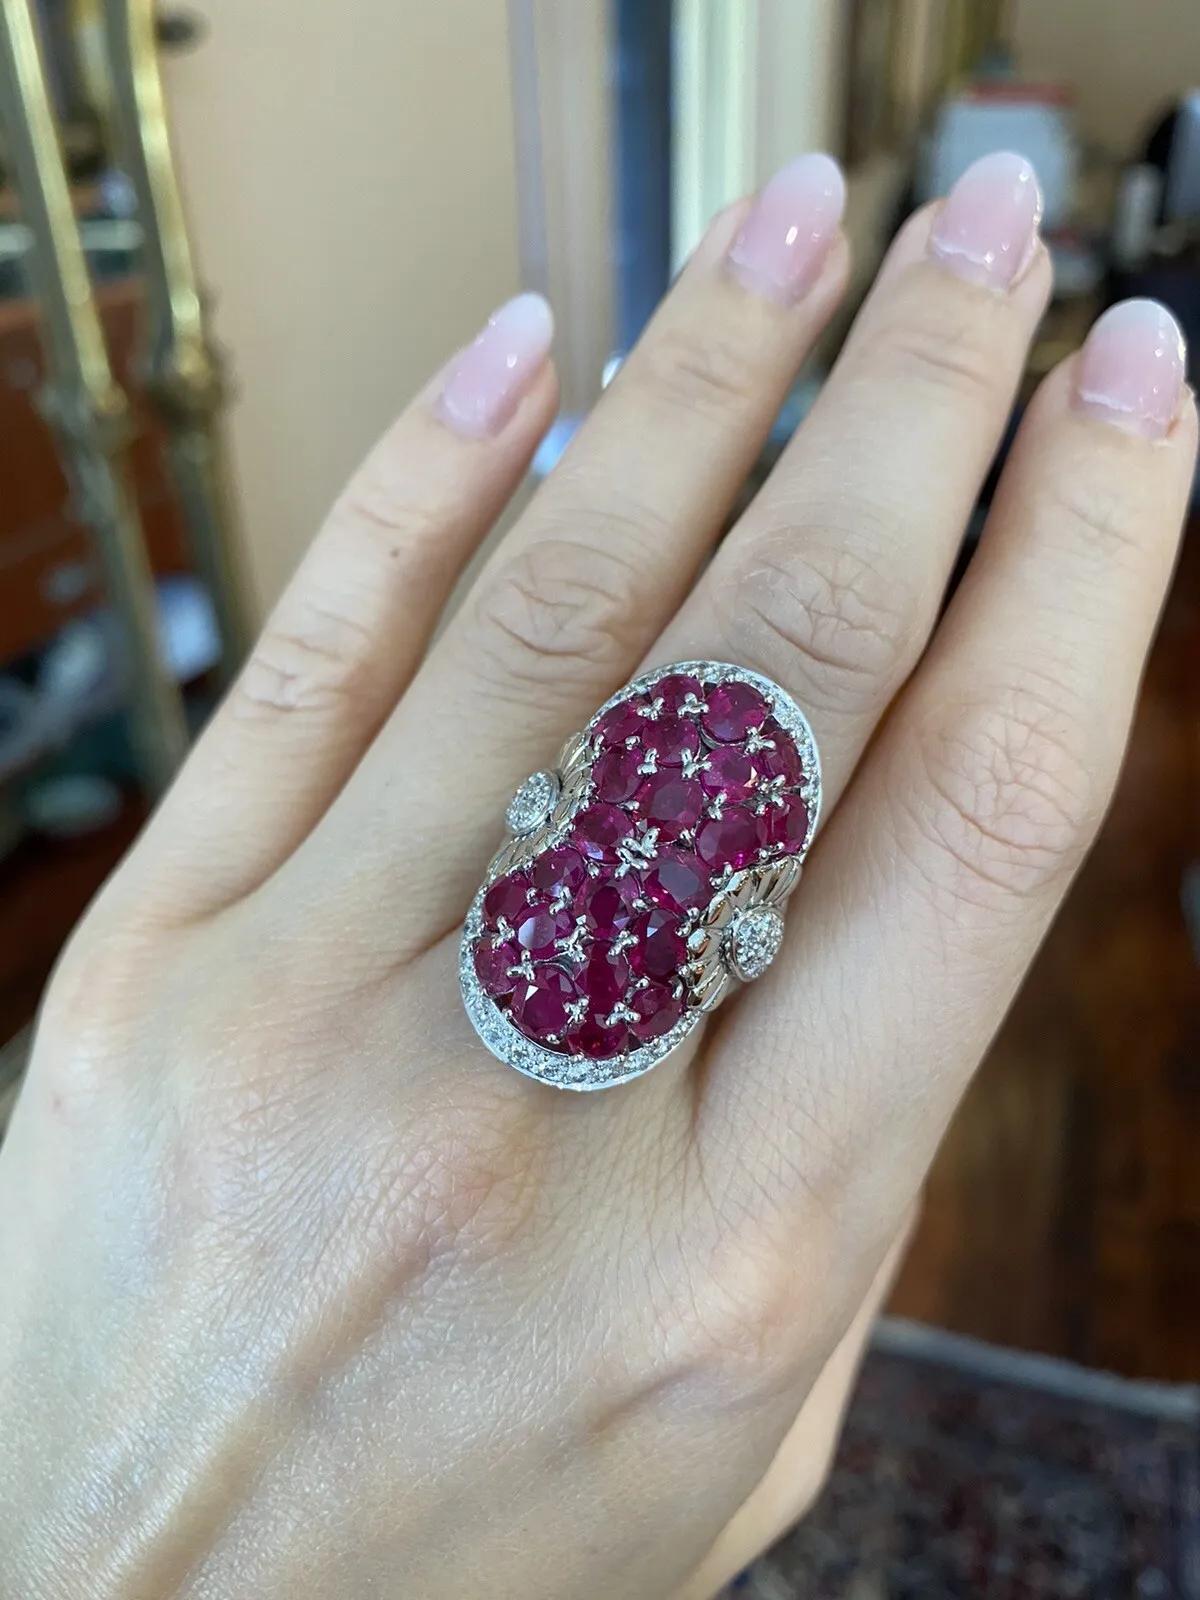 Large Oval Ruby Pavé Dome Ring with Diamonds in Platinum

Large Ruby and Diamond Ring features 23 Large Oval Red Rubies Pavé set in dome setting accented by .97 carats of Round Brilliant Diamonds set in Platinum.

Total ruby weight is 10.56